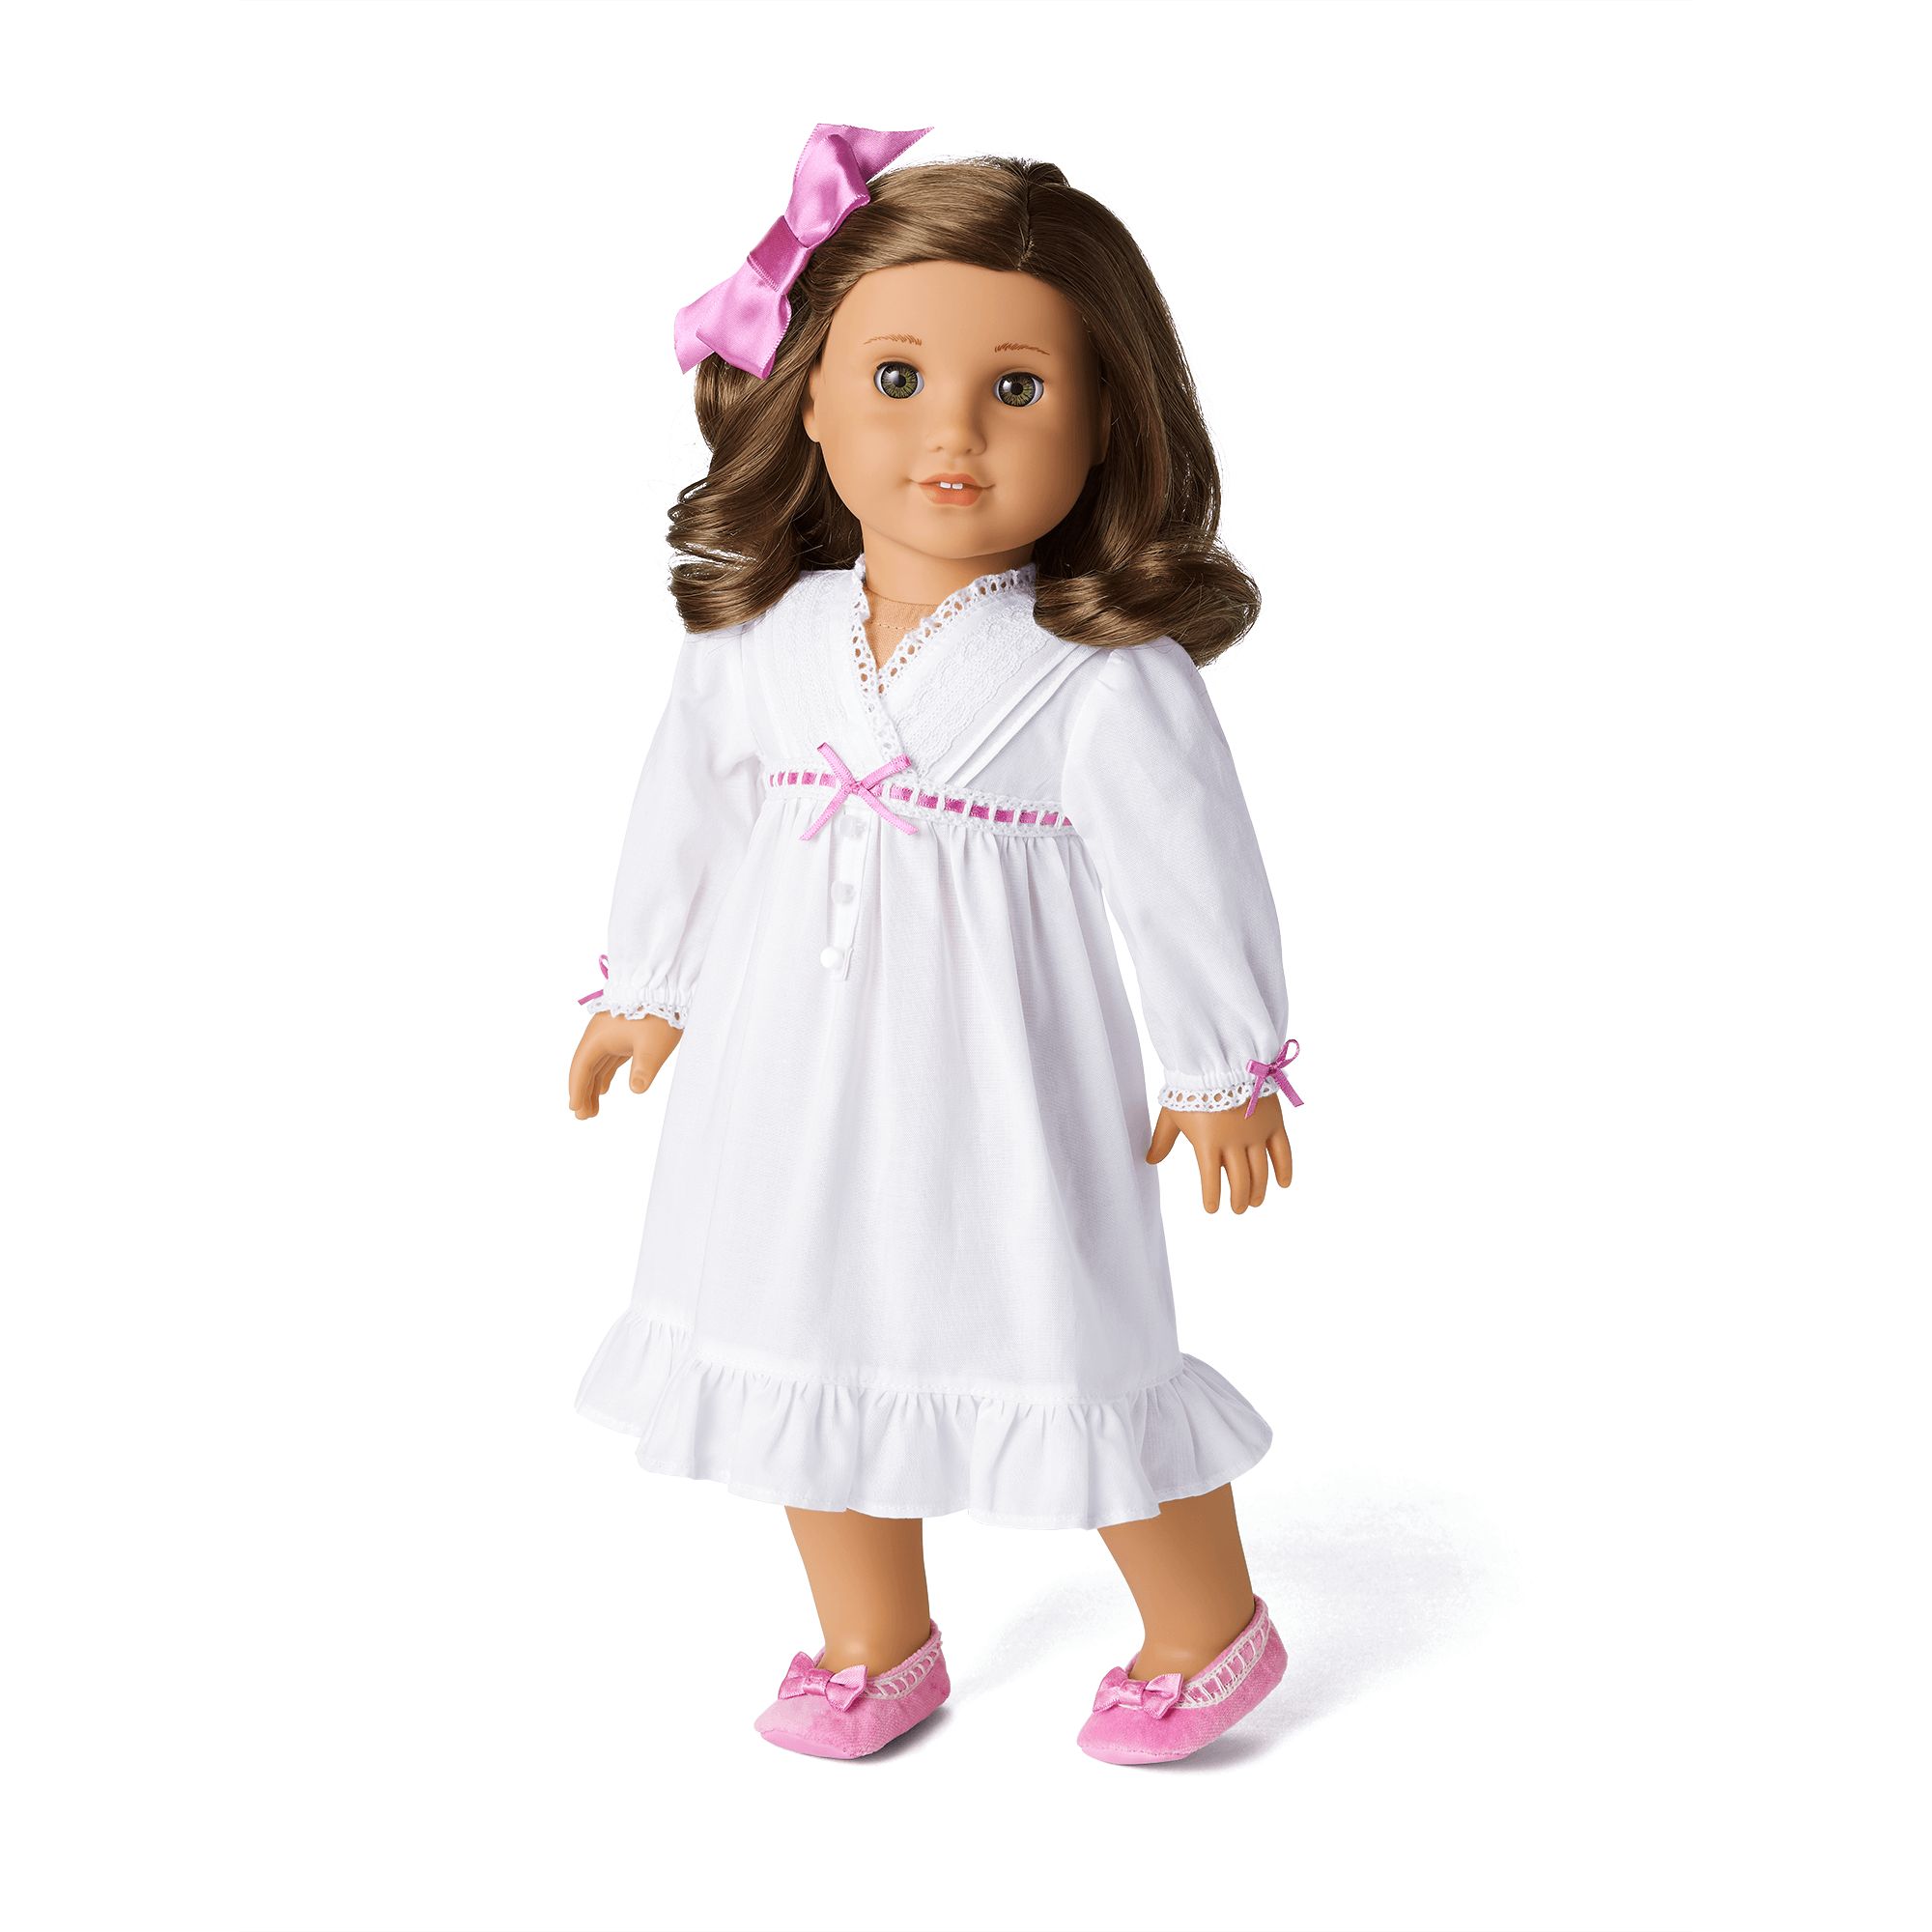 New American Girl Nellie HAIRBOW For Holiday Dress Outfit Molly Rebecca Samantha